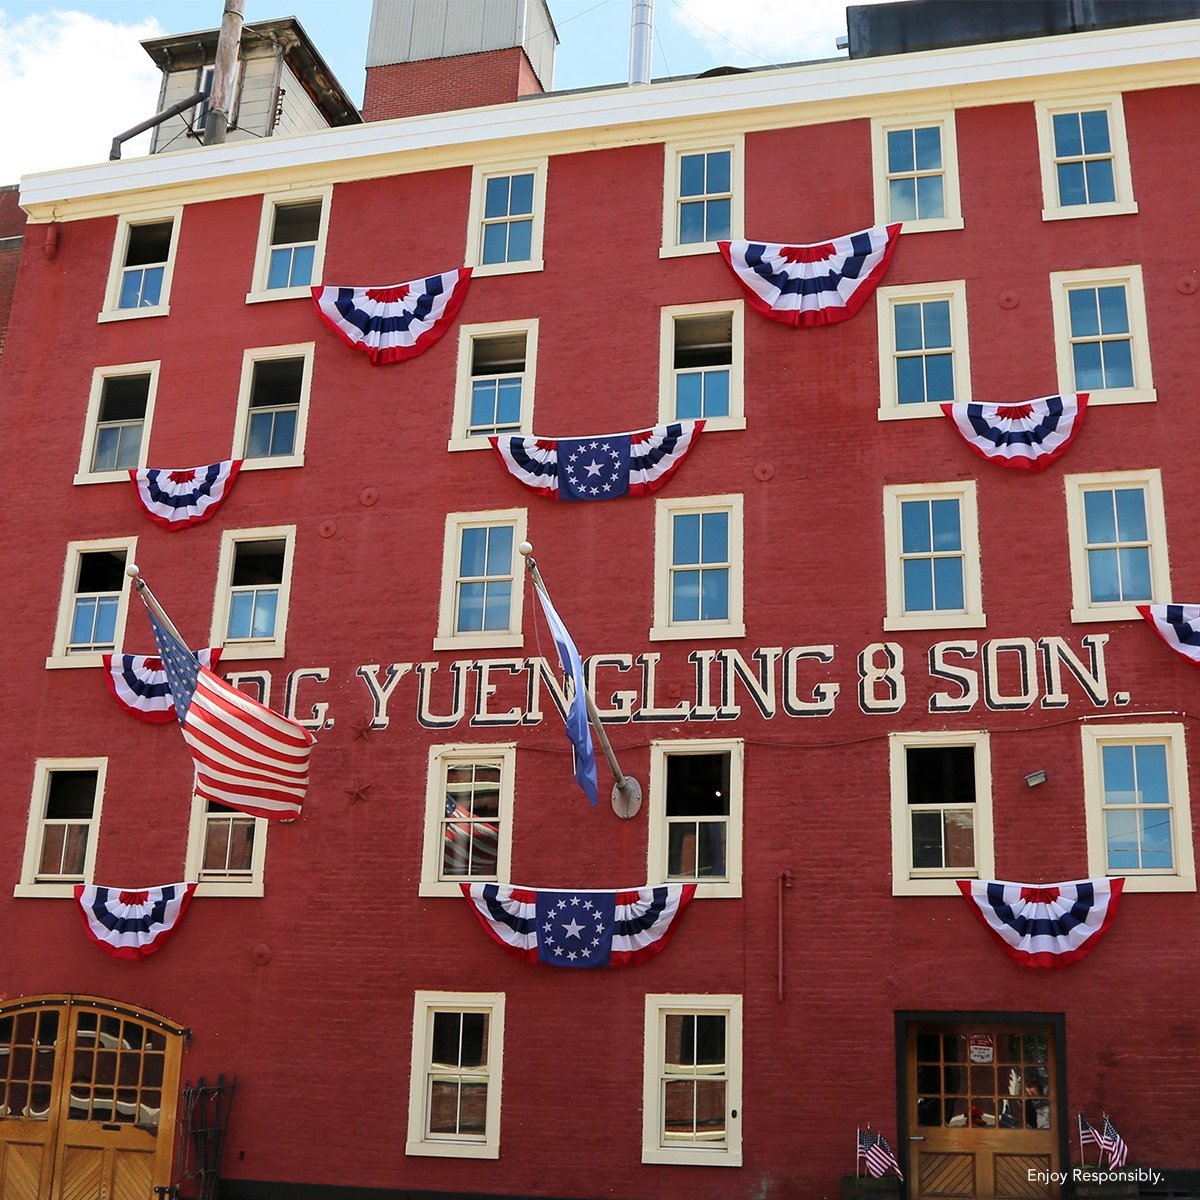 The Oldest brewery in the U.S.: D.G. Yuengling & Son, est. 1829